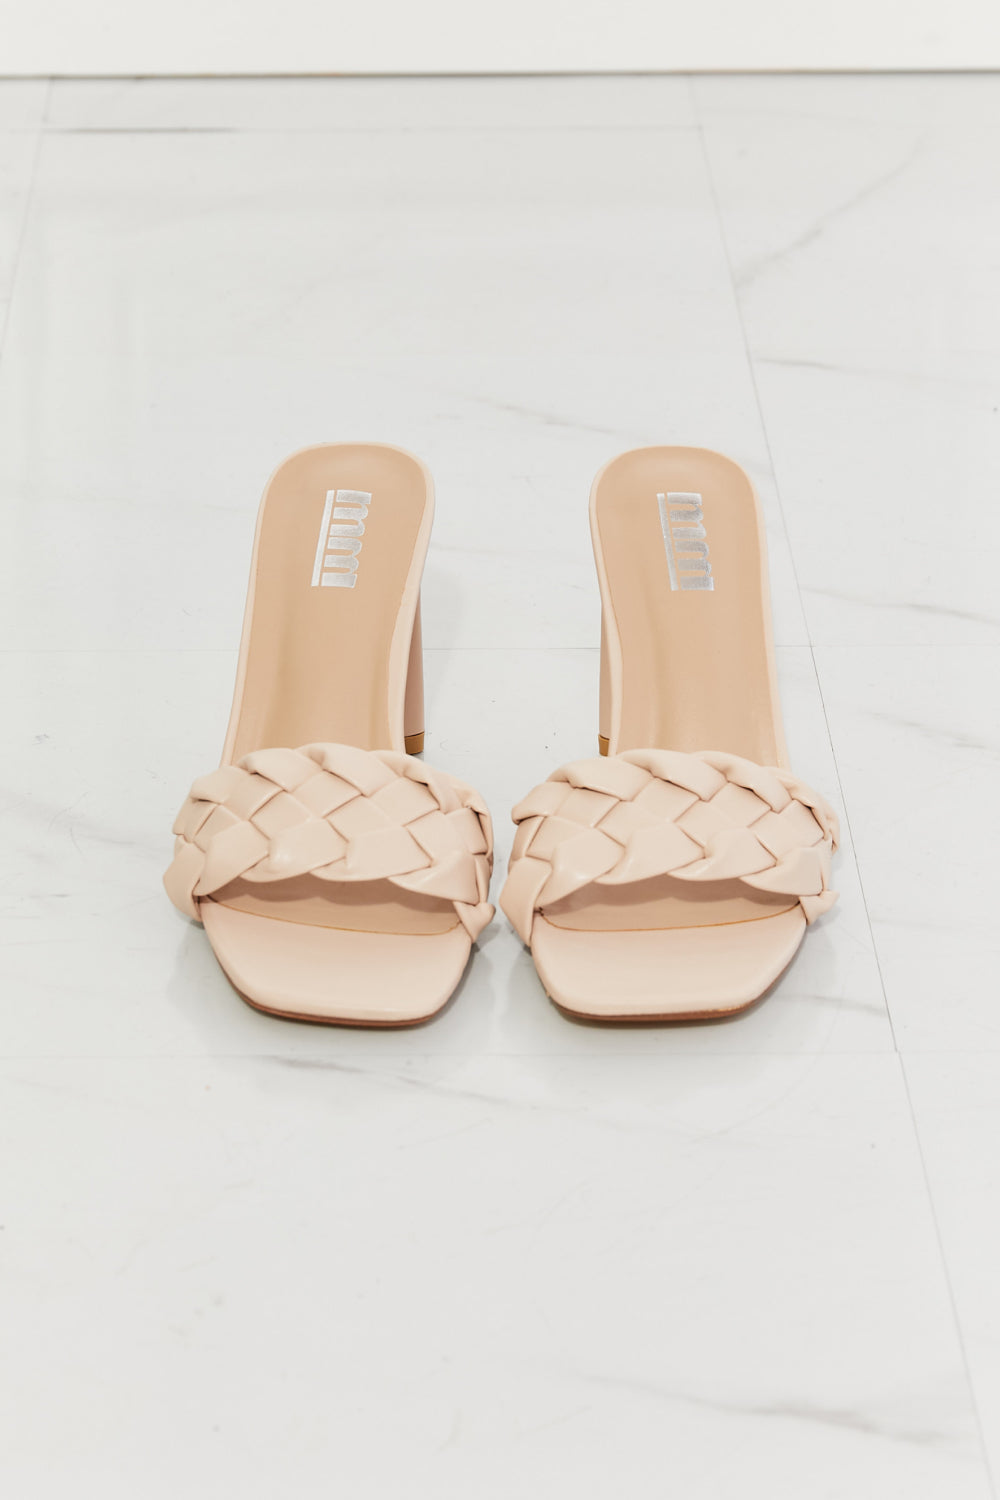 MMShoes Top of the World Braided Block Heel Sandals in Beige Sandals